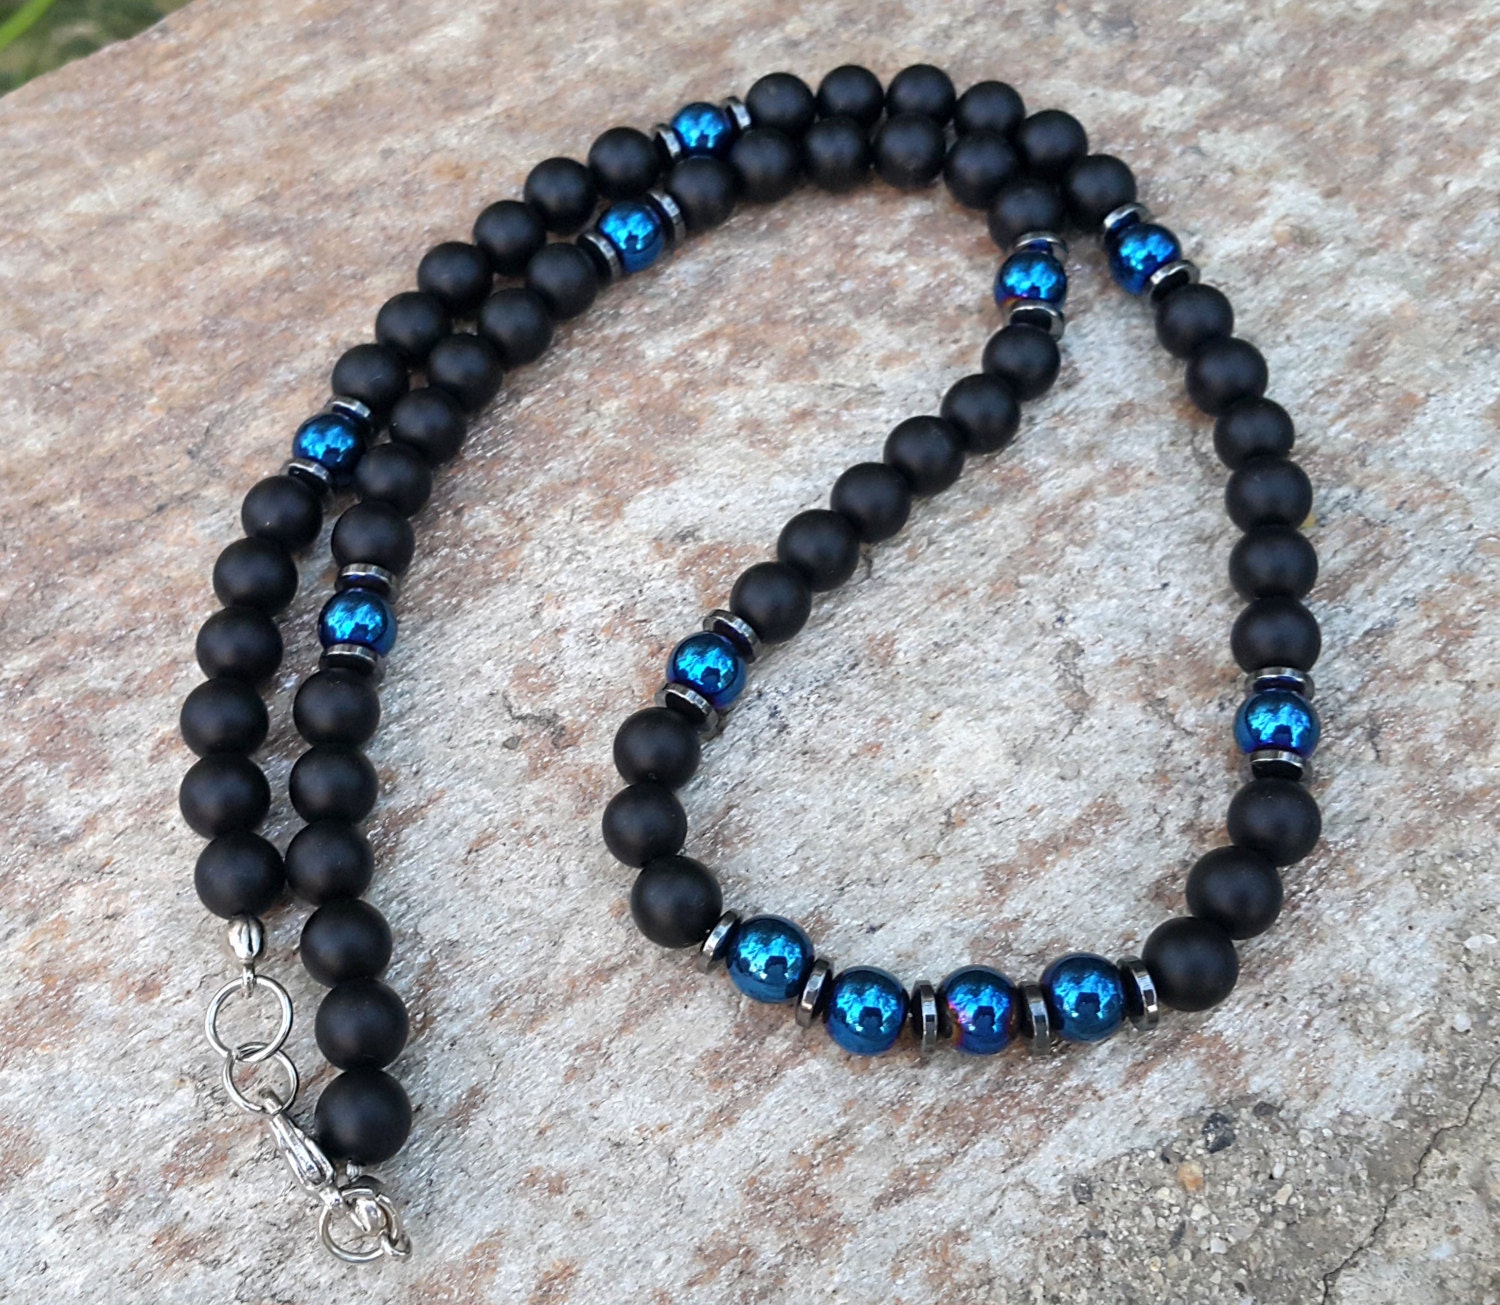 Fashionable and Popular Men Beaded Necklace for Jewelry Gift and for a  Stylish Look | SHEIN USA